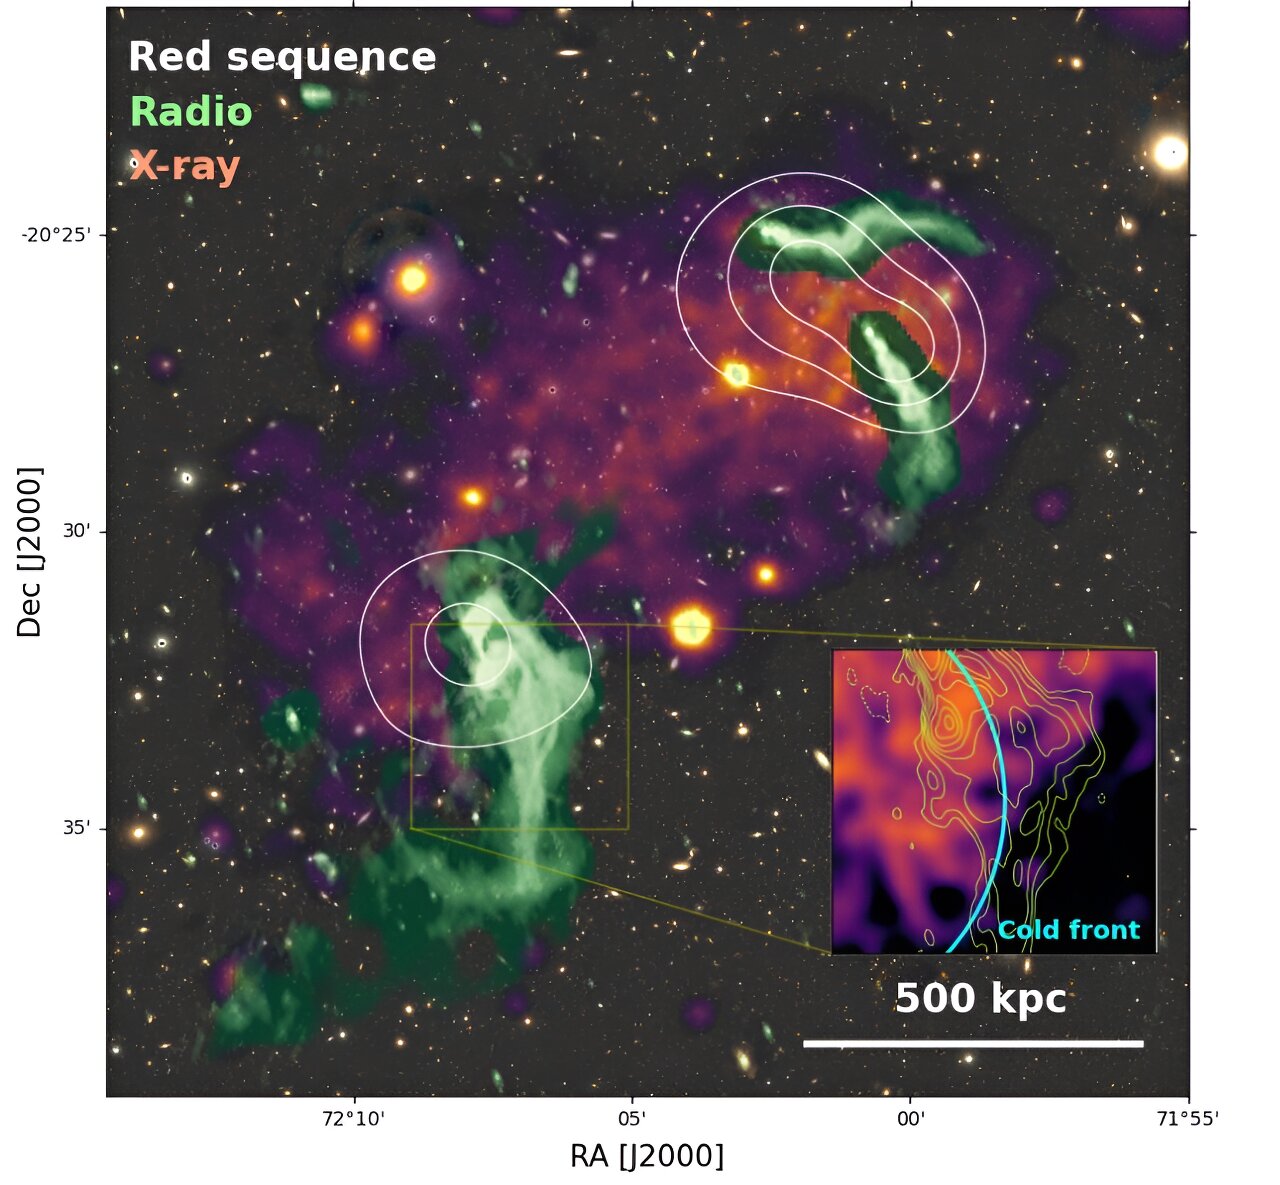 Large-scale bent radio jet detected in galaxy cluster Abell 514